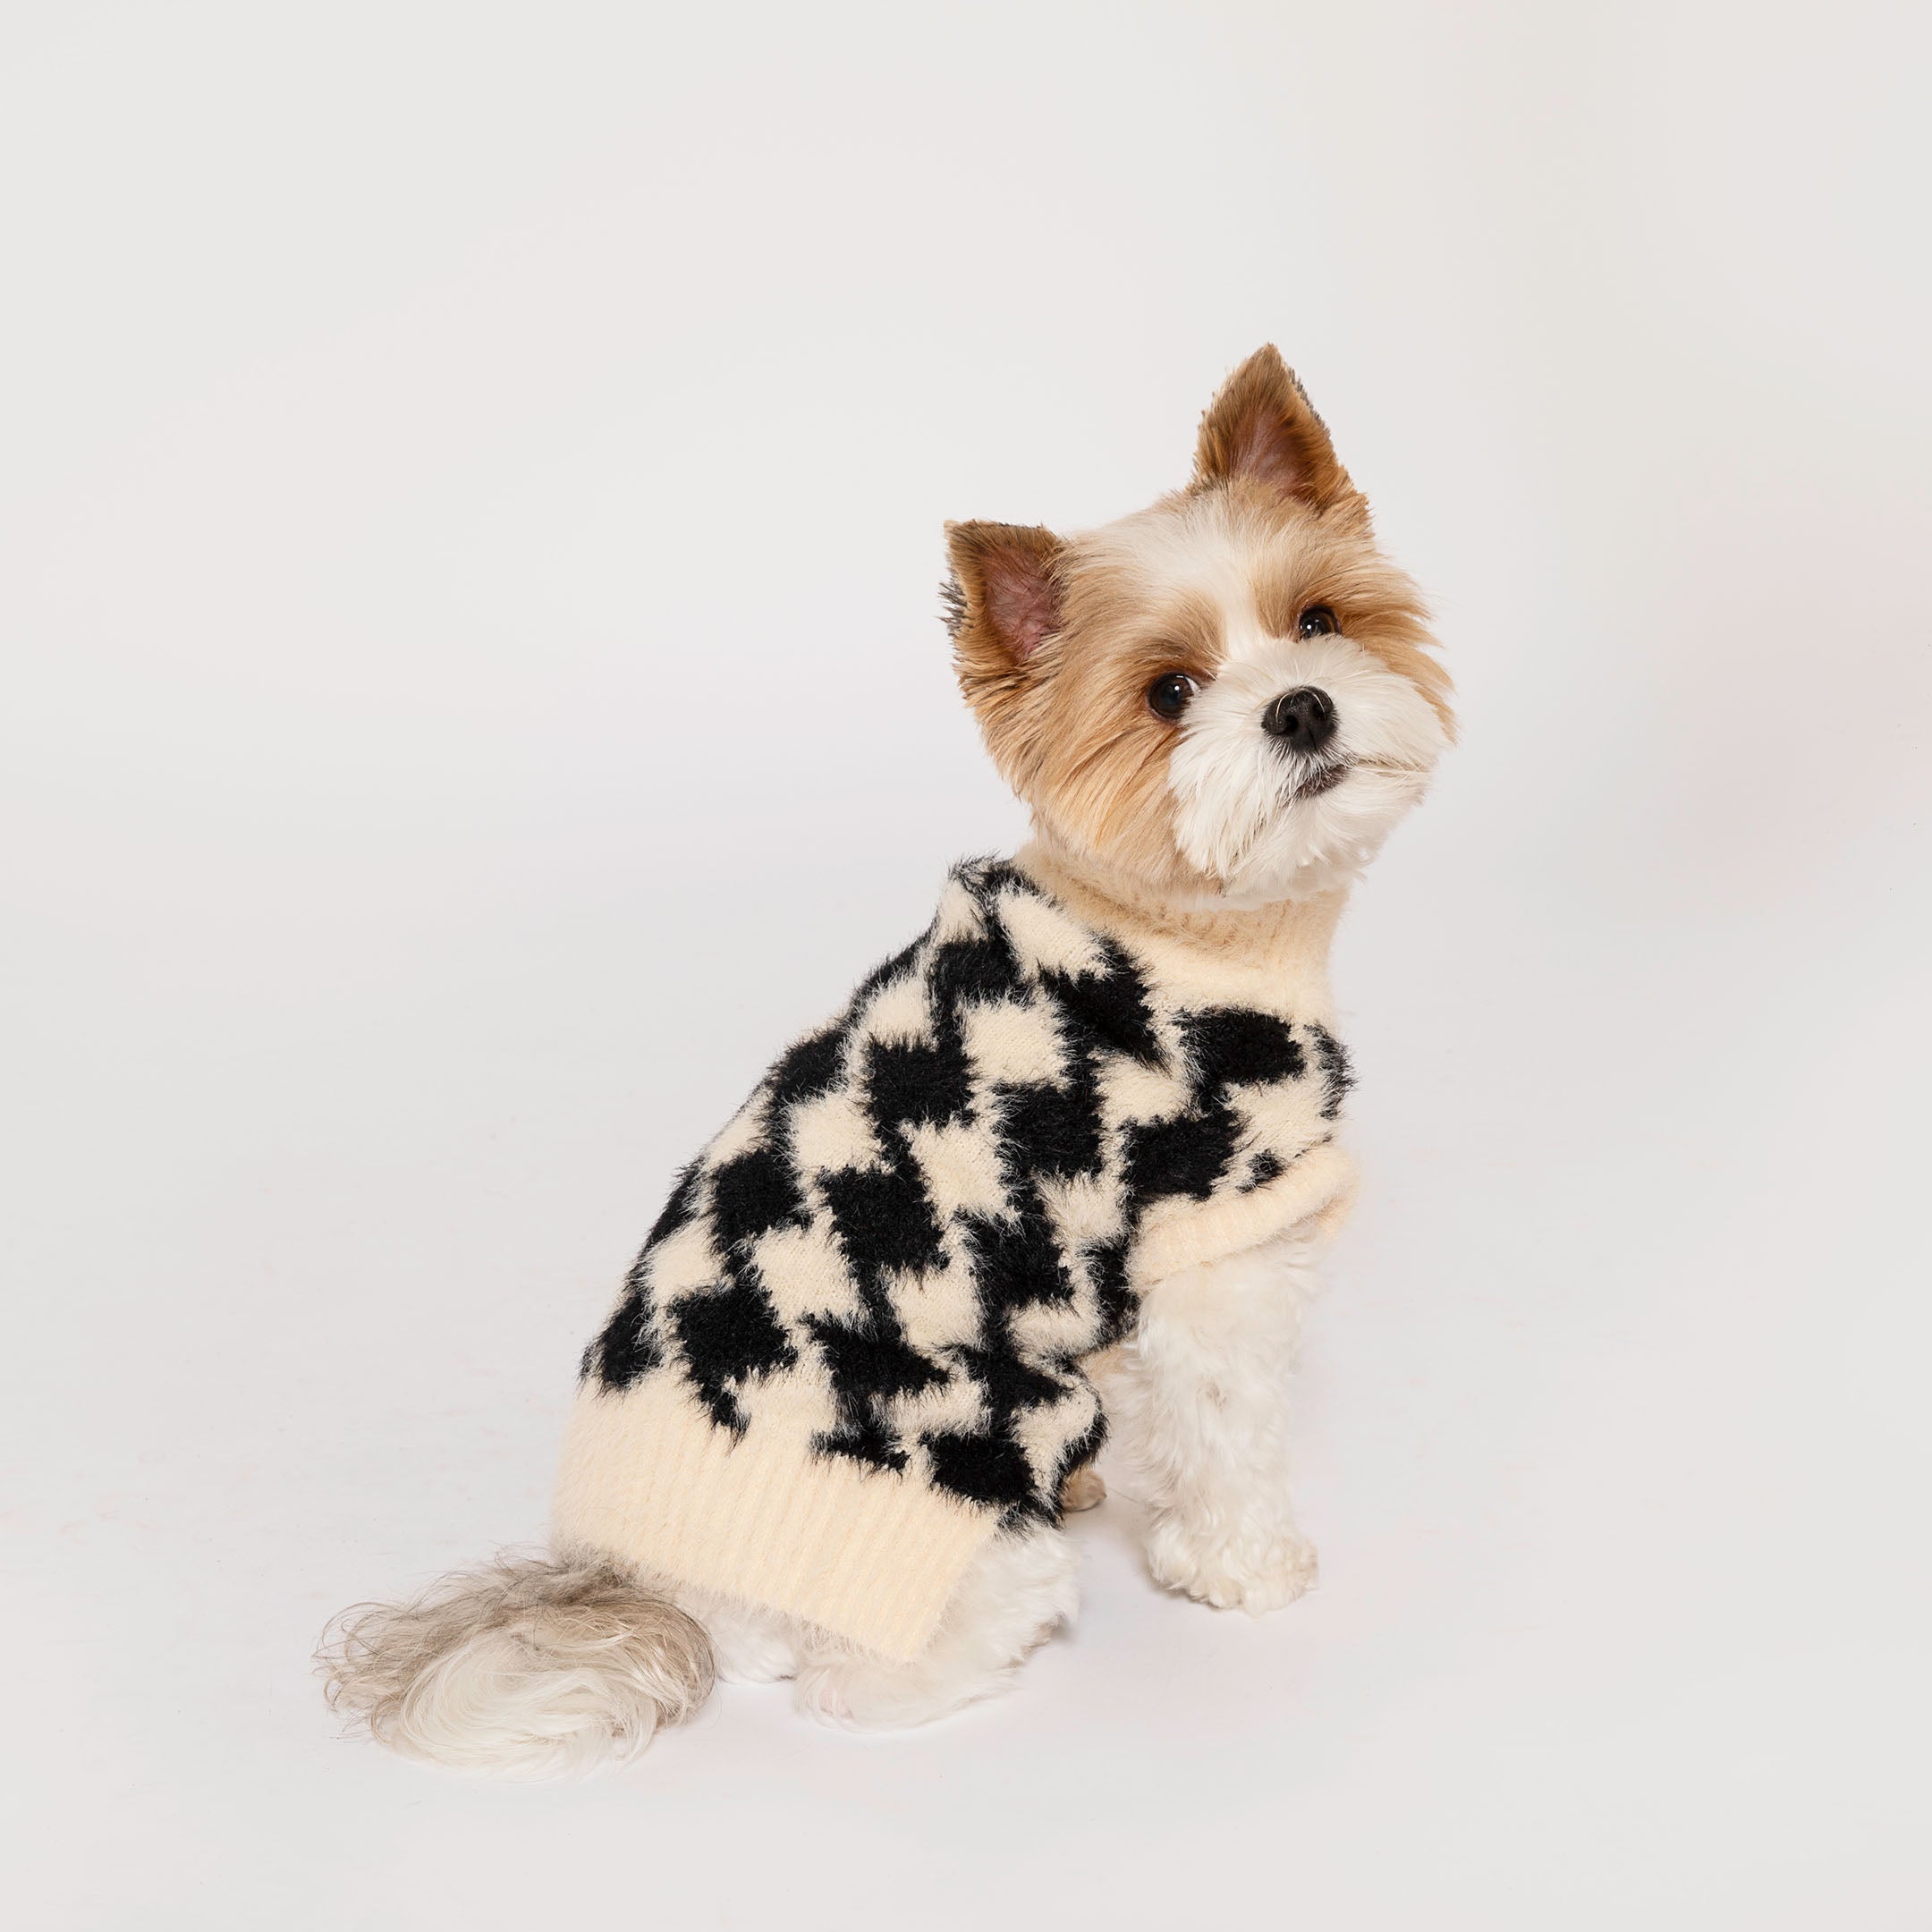 Charming Yorkshire Terrier mix in a beige and black houndstooth patterned sweater, looking attentively to the side, against a clean white background.